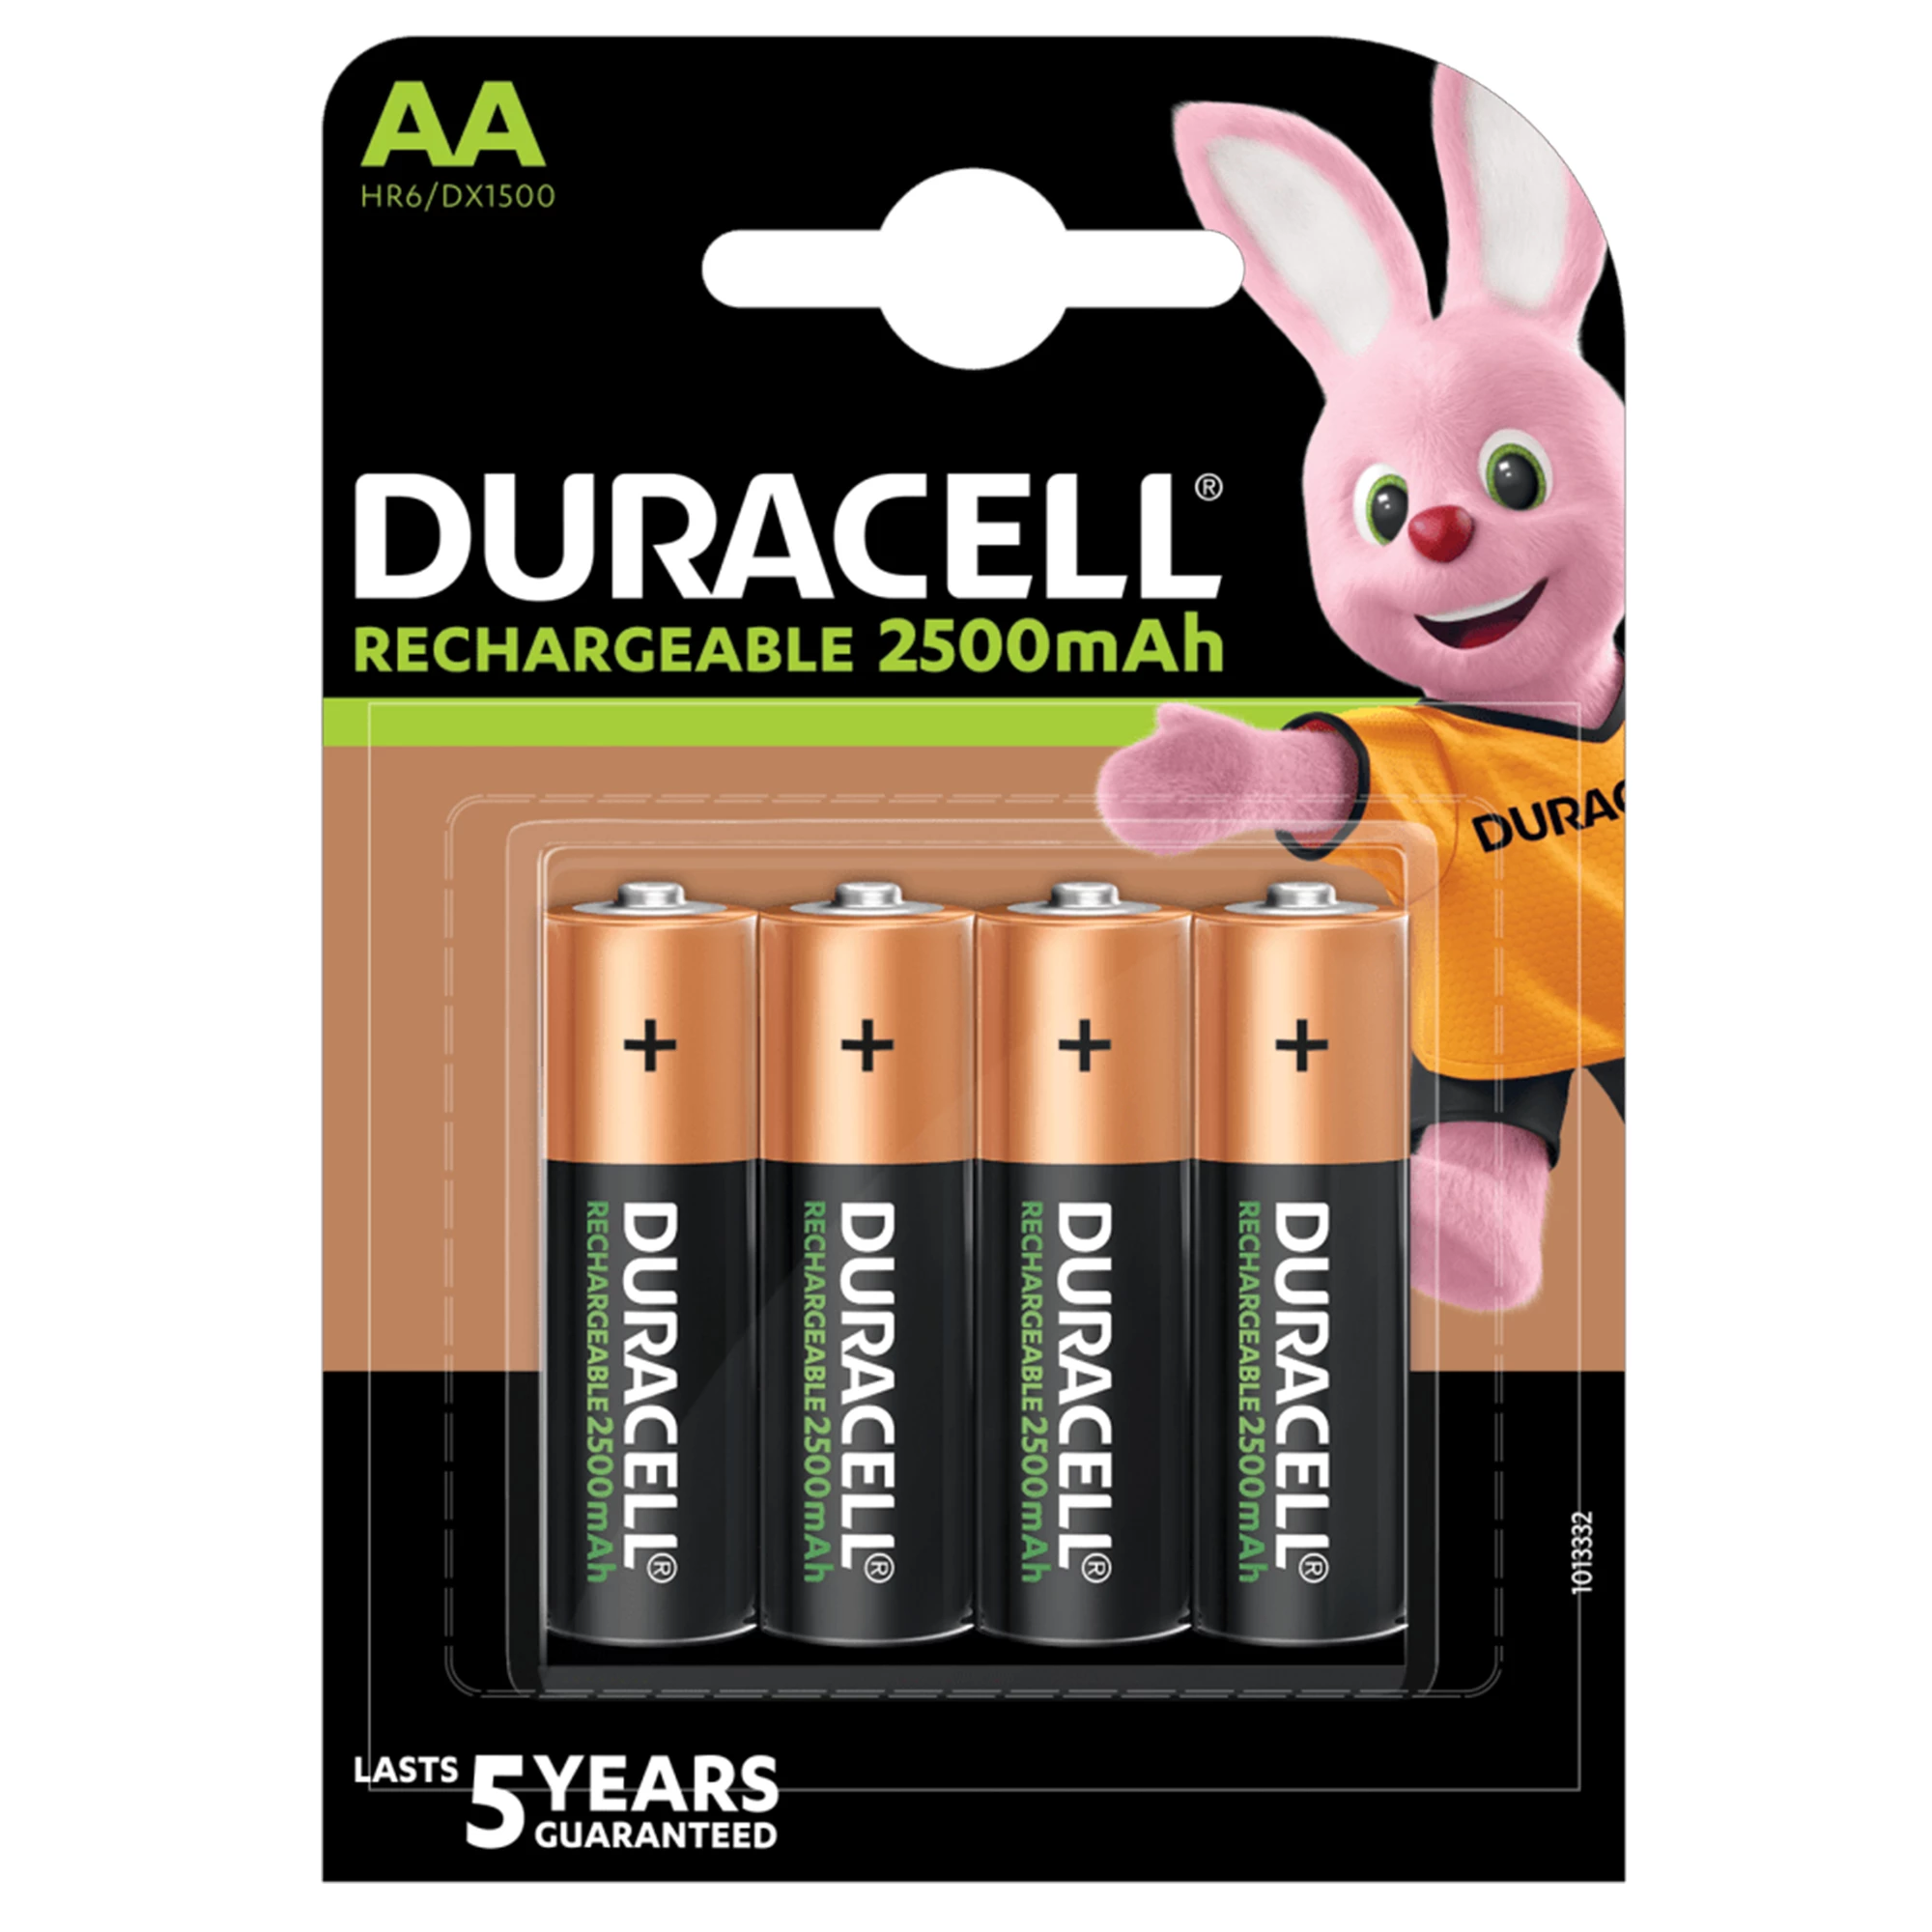 Аккумулятор Duracell Rechargeable AA 2500mAh Batteries 1,2V HR6/DX1500 [Pack of 4] (5000394057043)